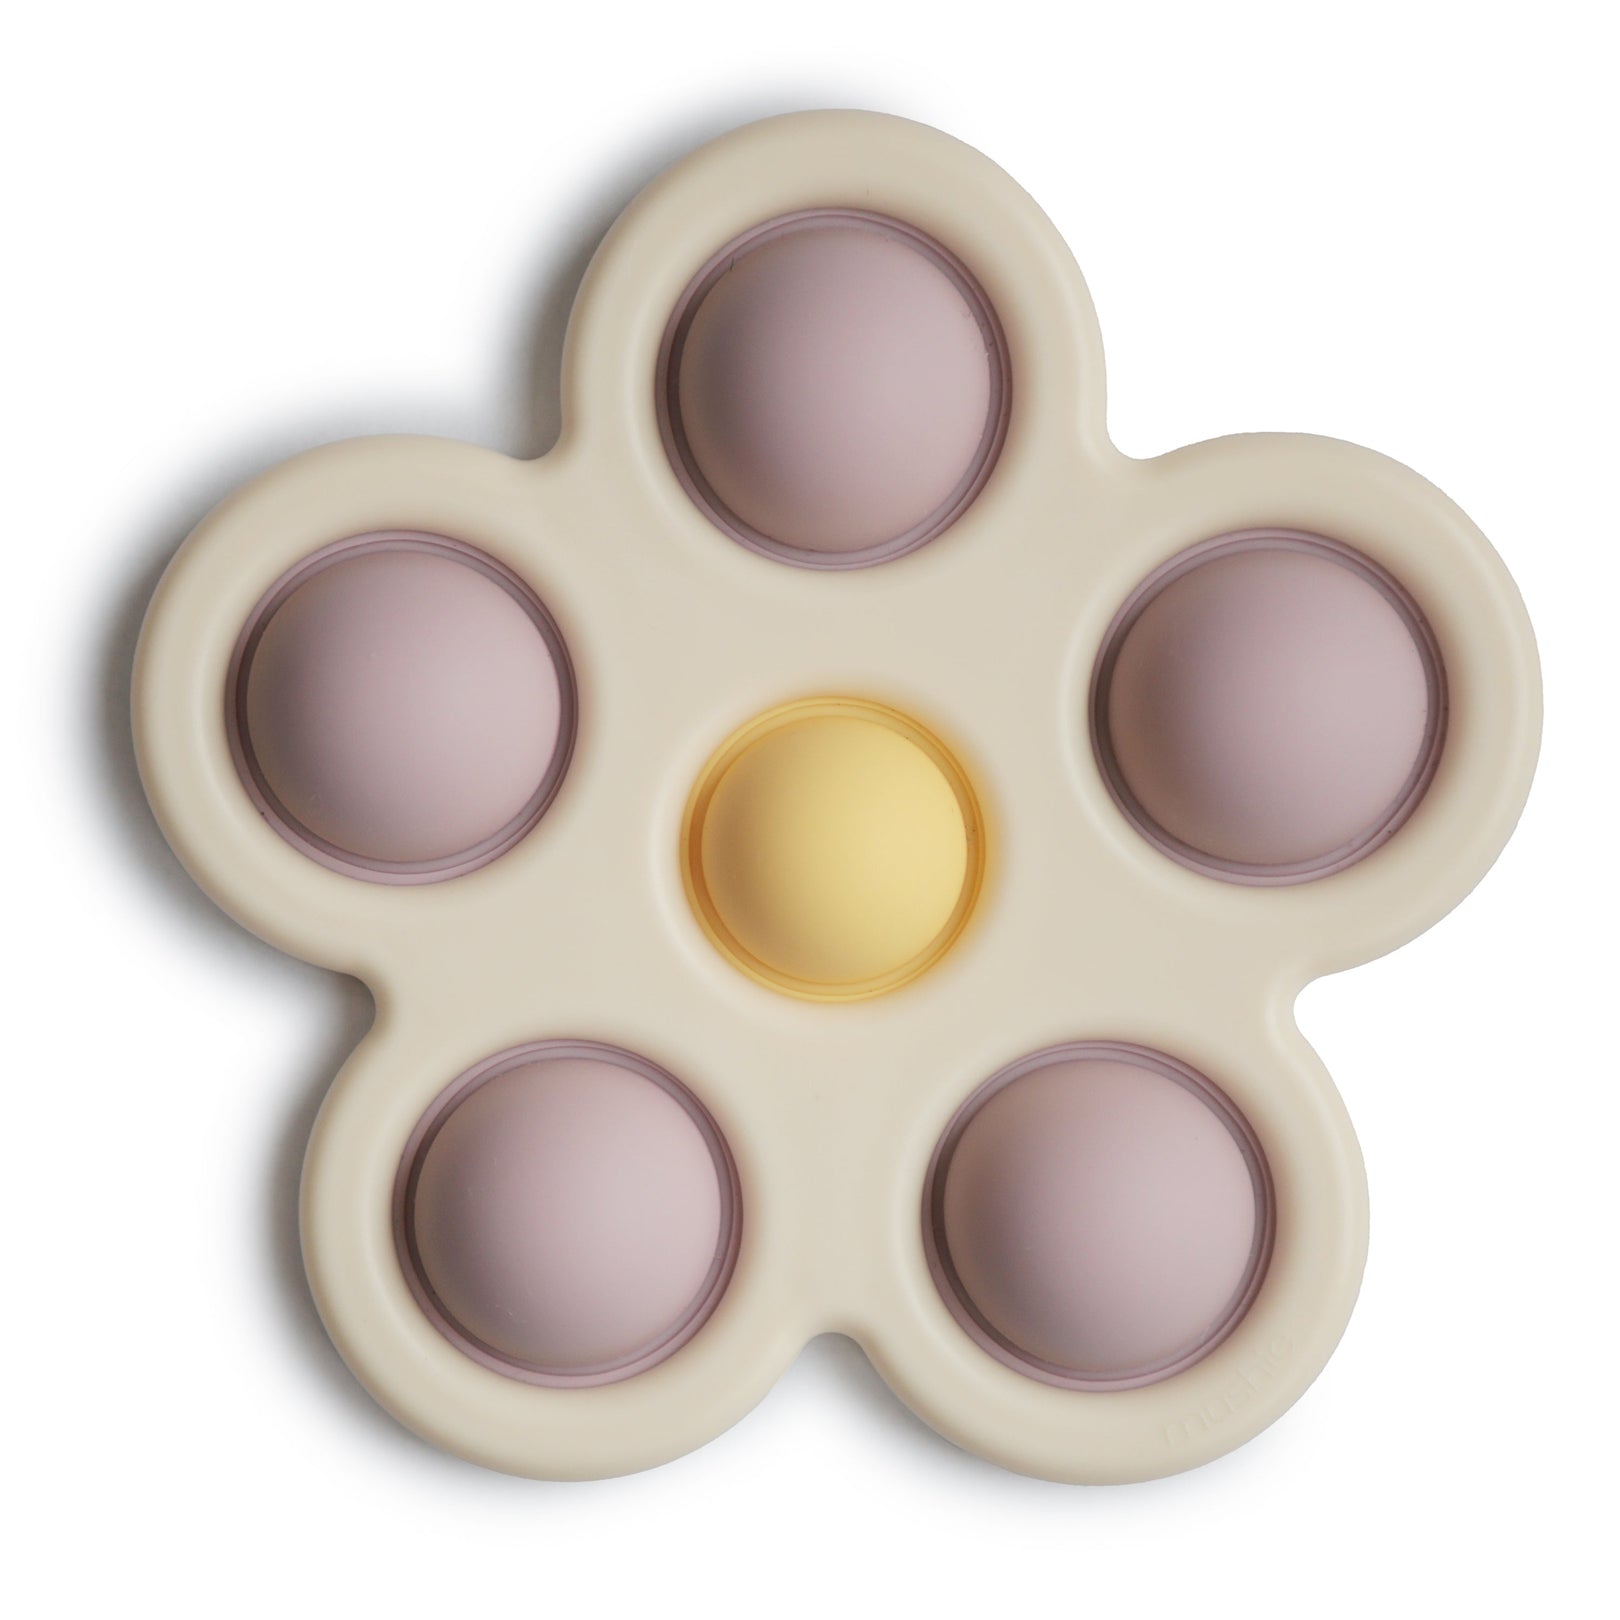 mushie Flower Press Toy in Soft Lilac/Daffodil/Ivory